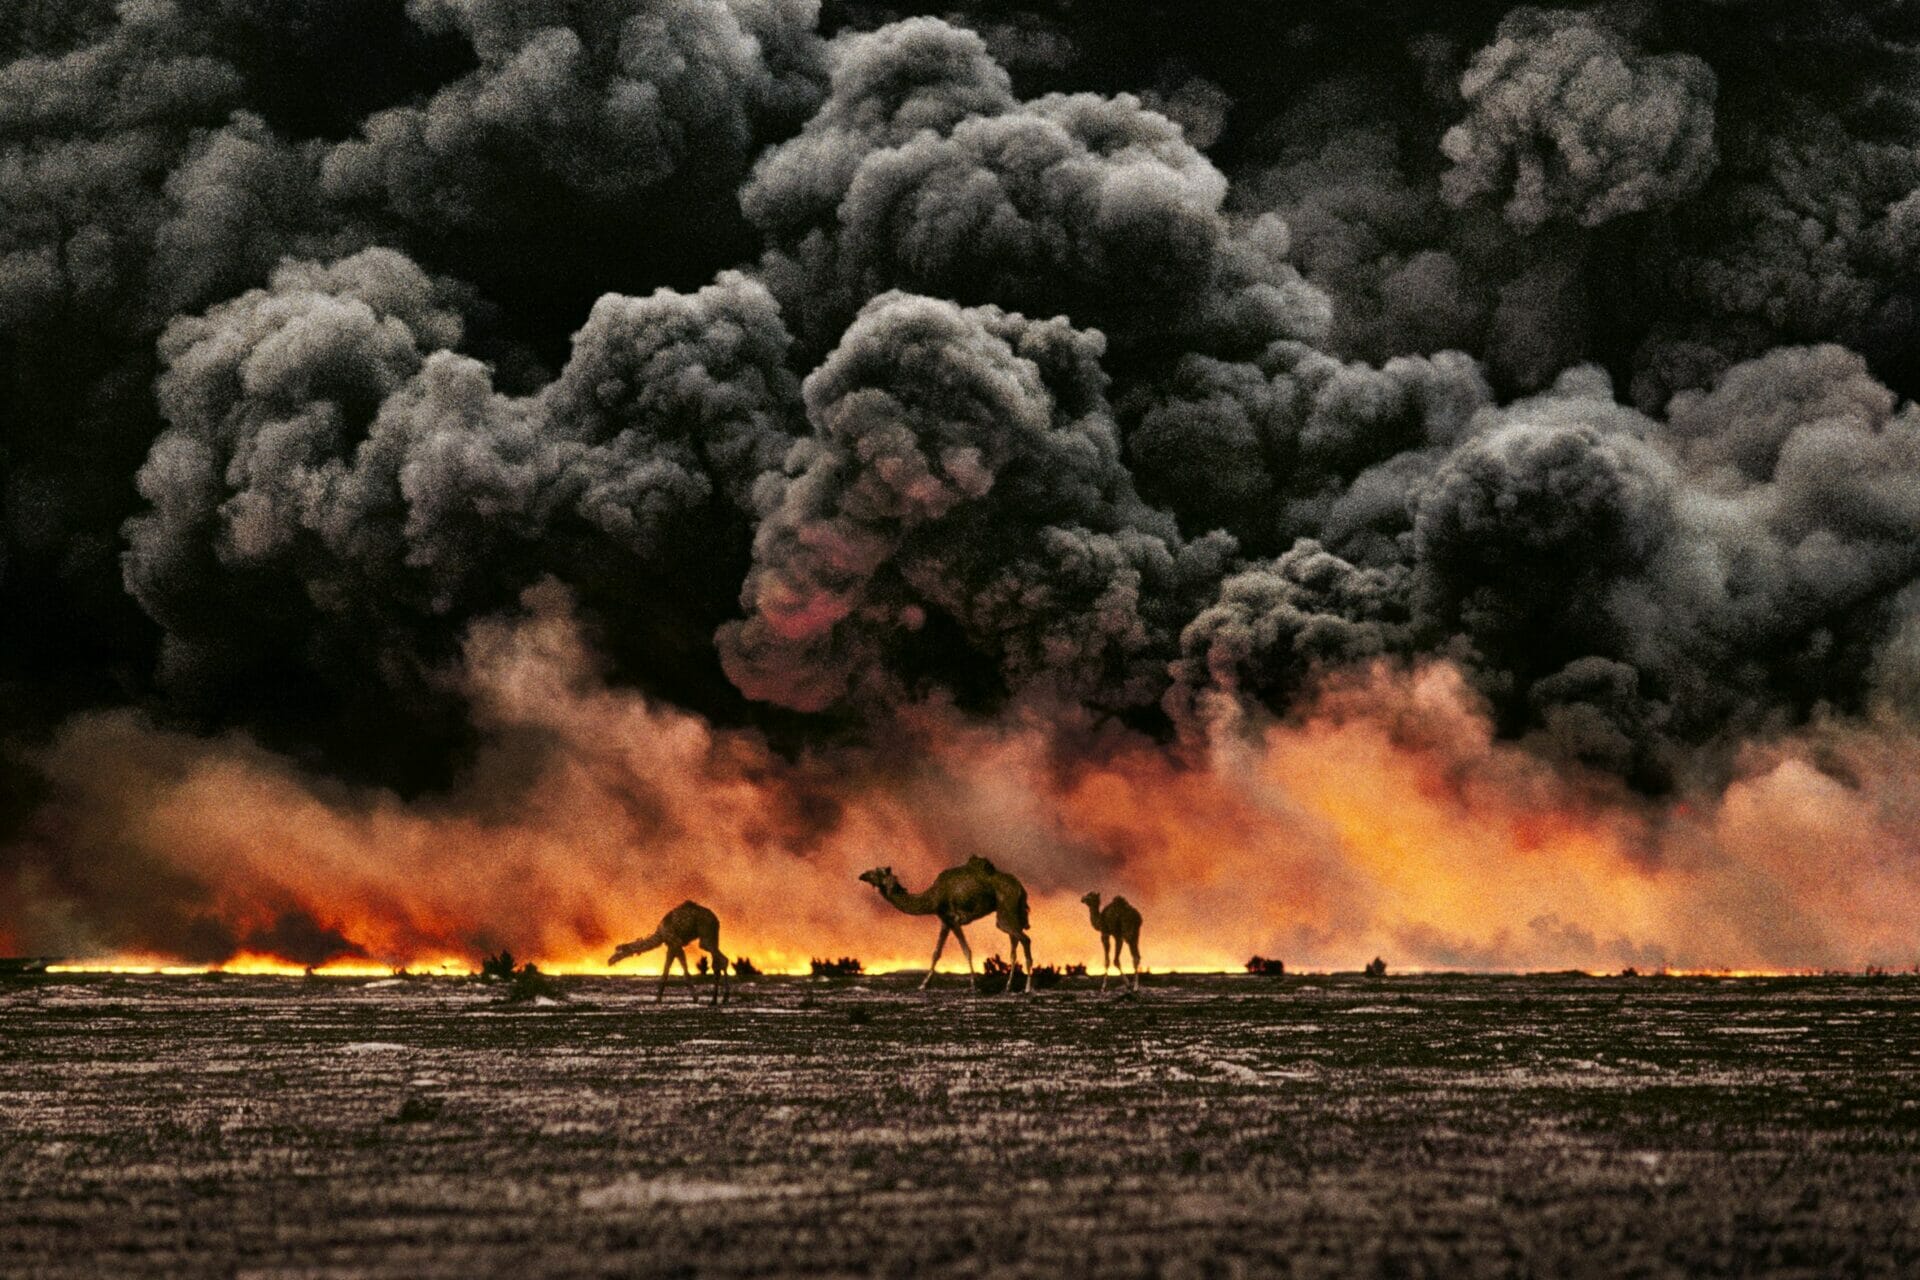 Photo taken by McCurry of camels traped by blazing fires, the consequences of the order to ignite oild fields by Saddam Hussein